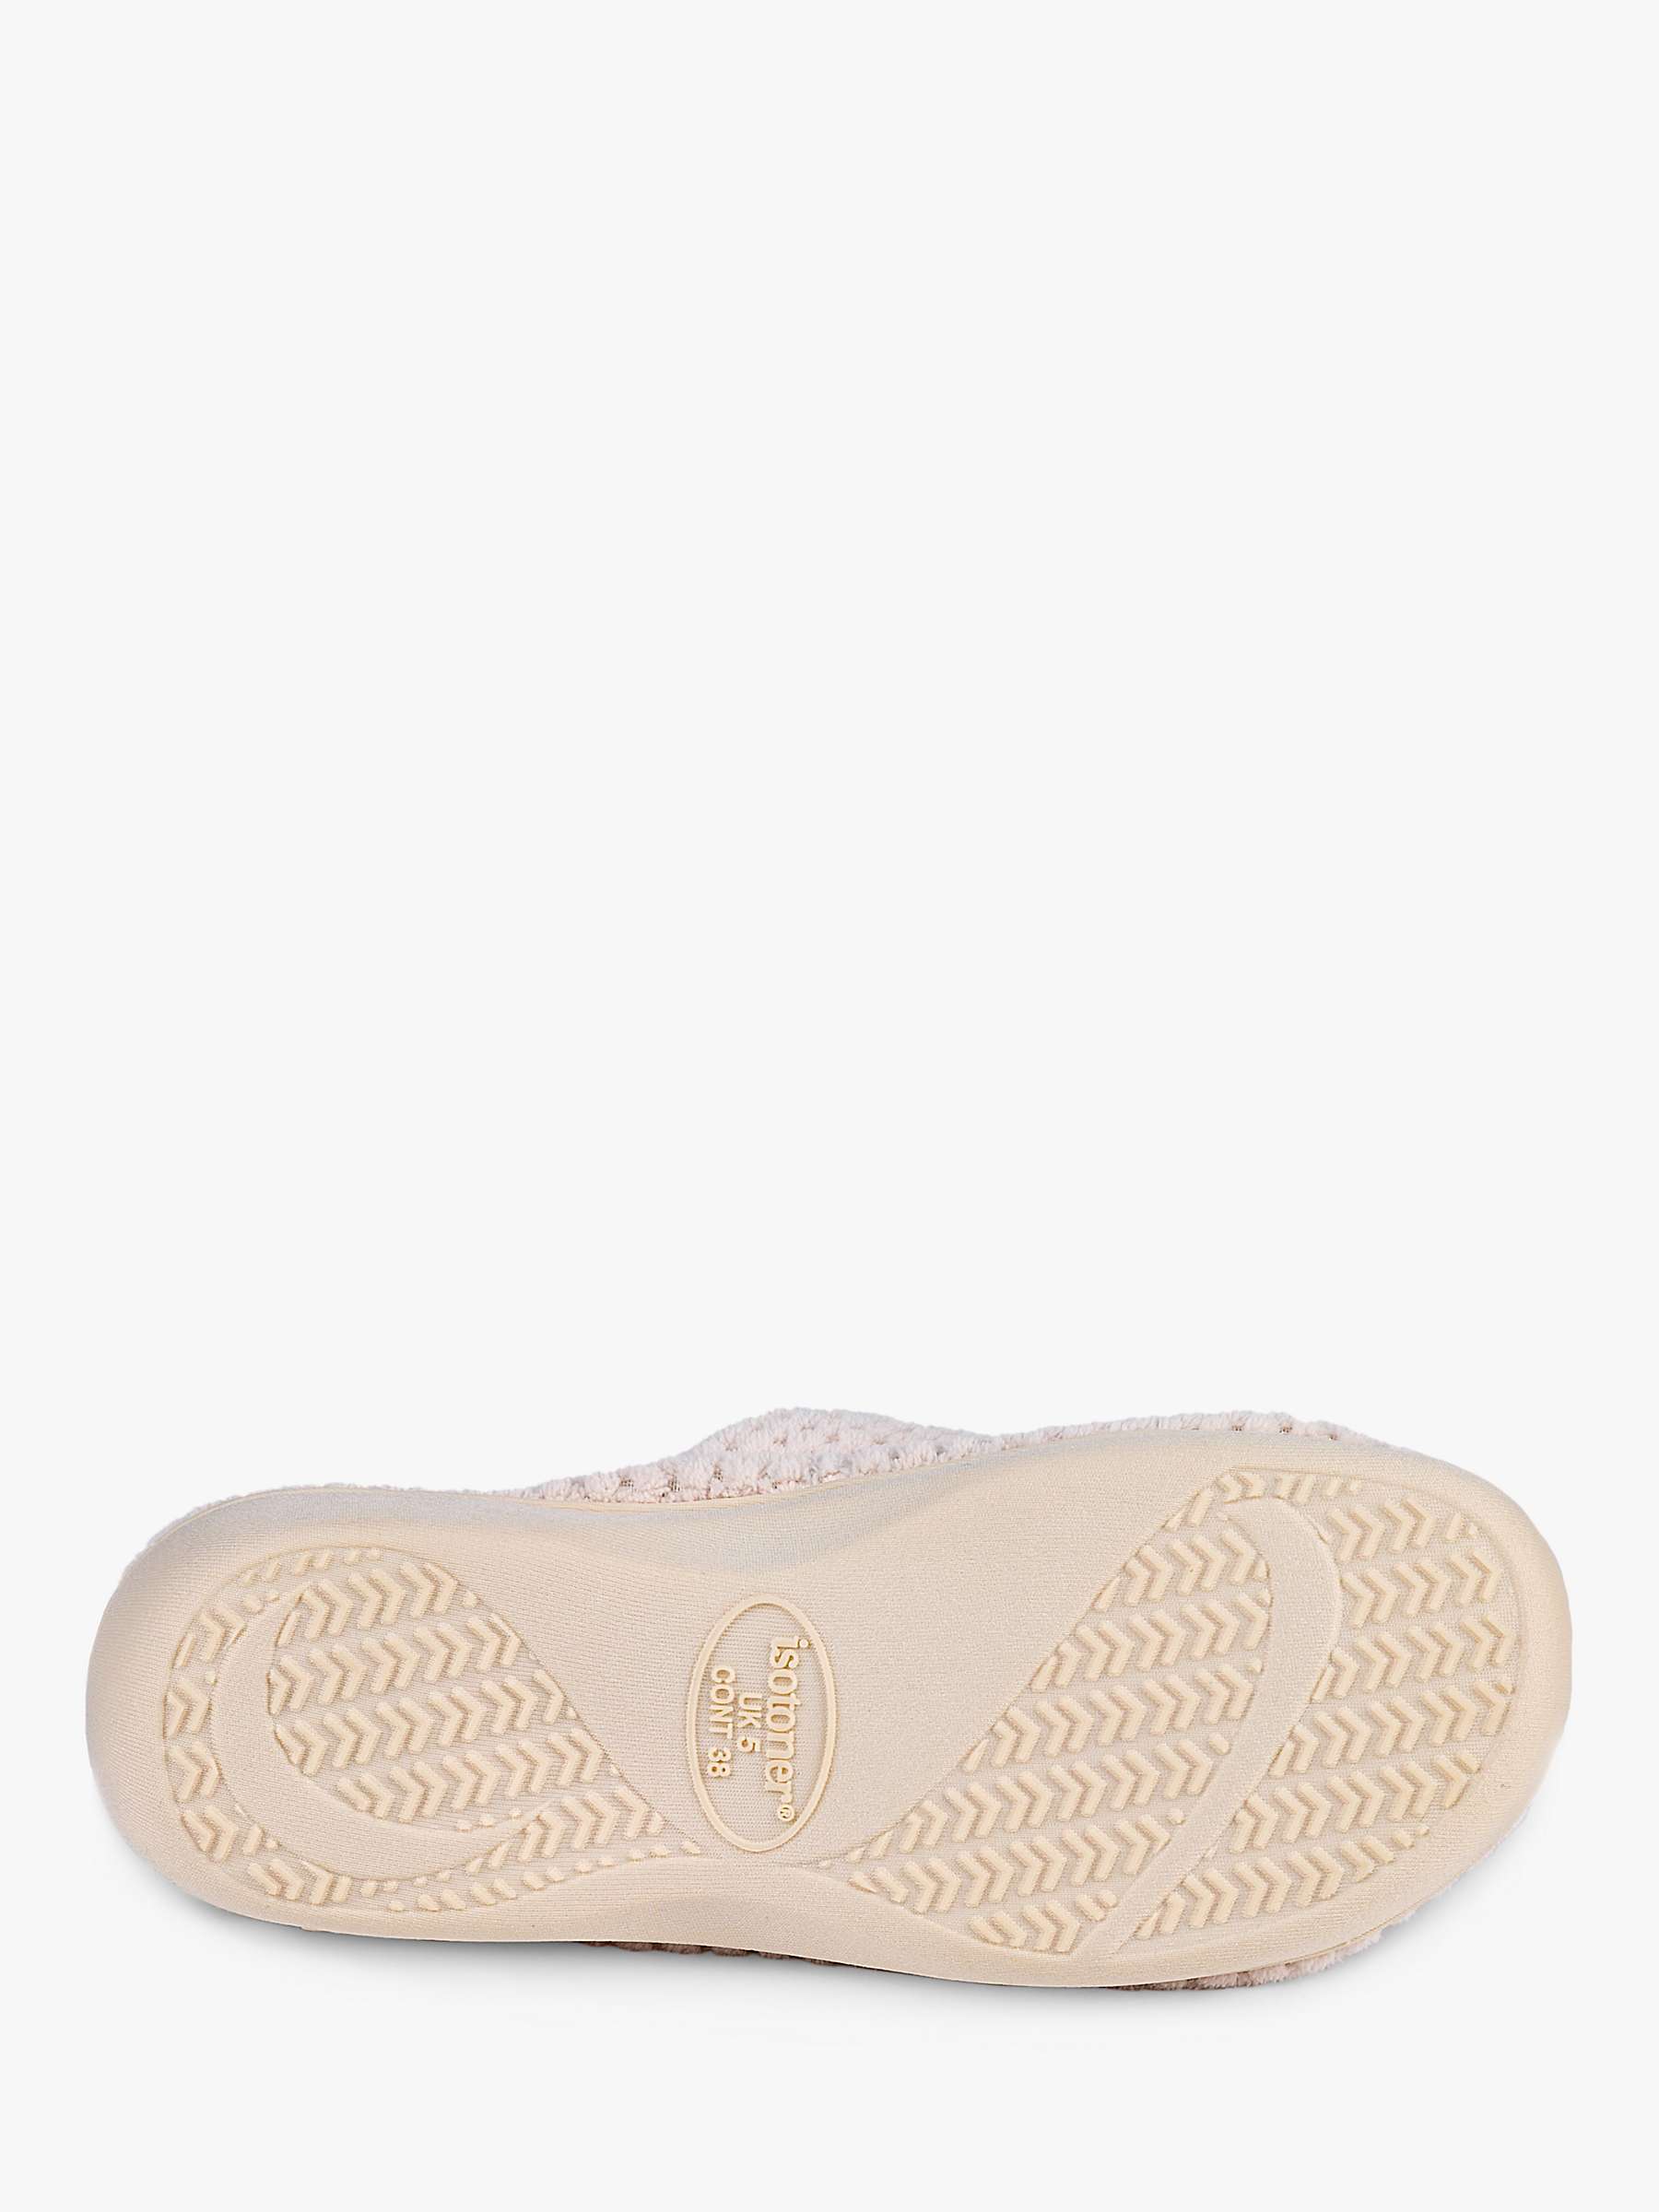 Buy totes Textured Popcorn Turnover Mule Slippers Online at johnlewis.com